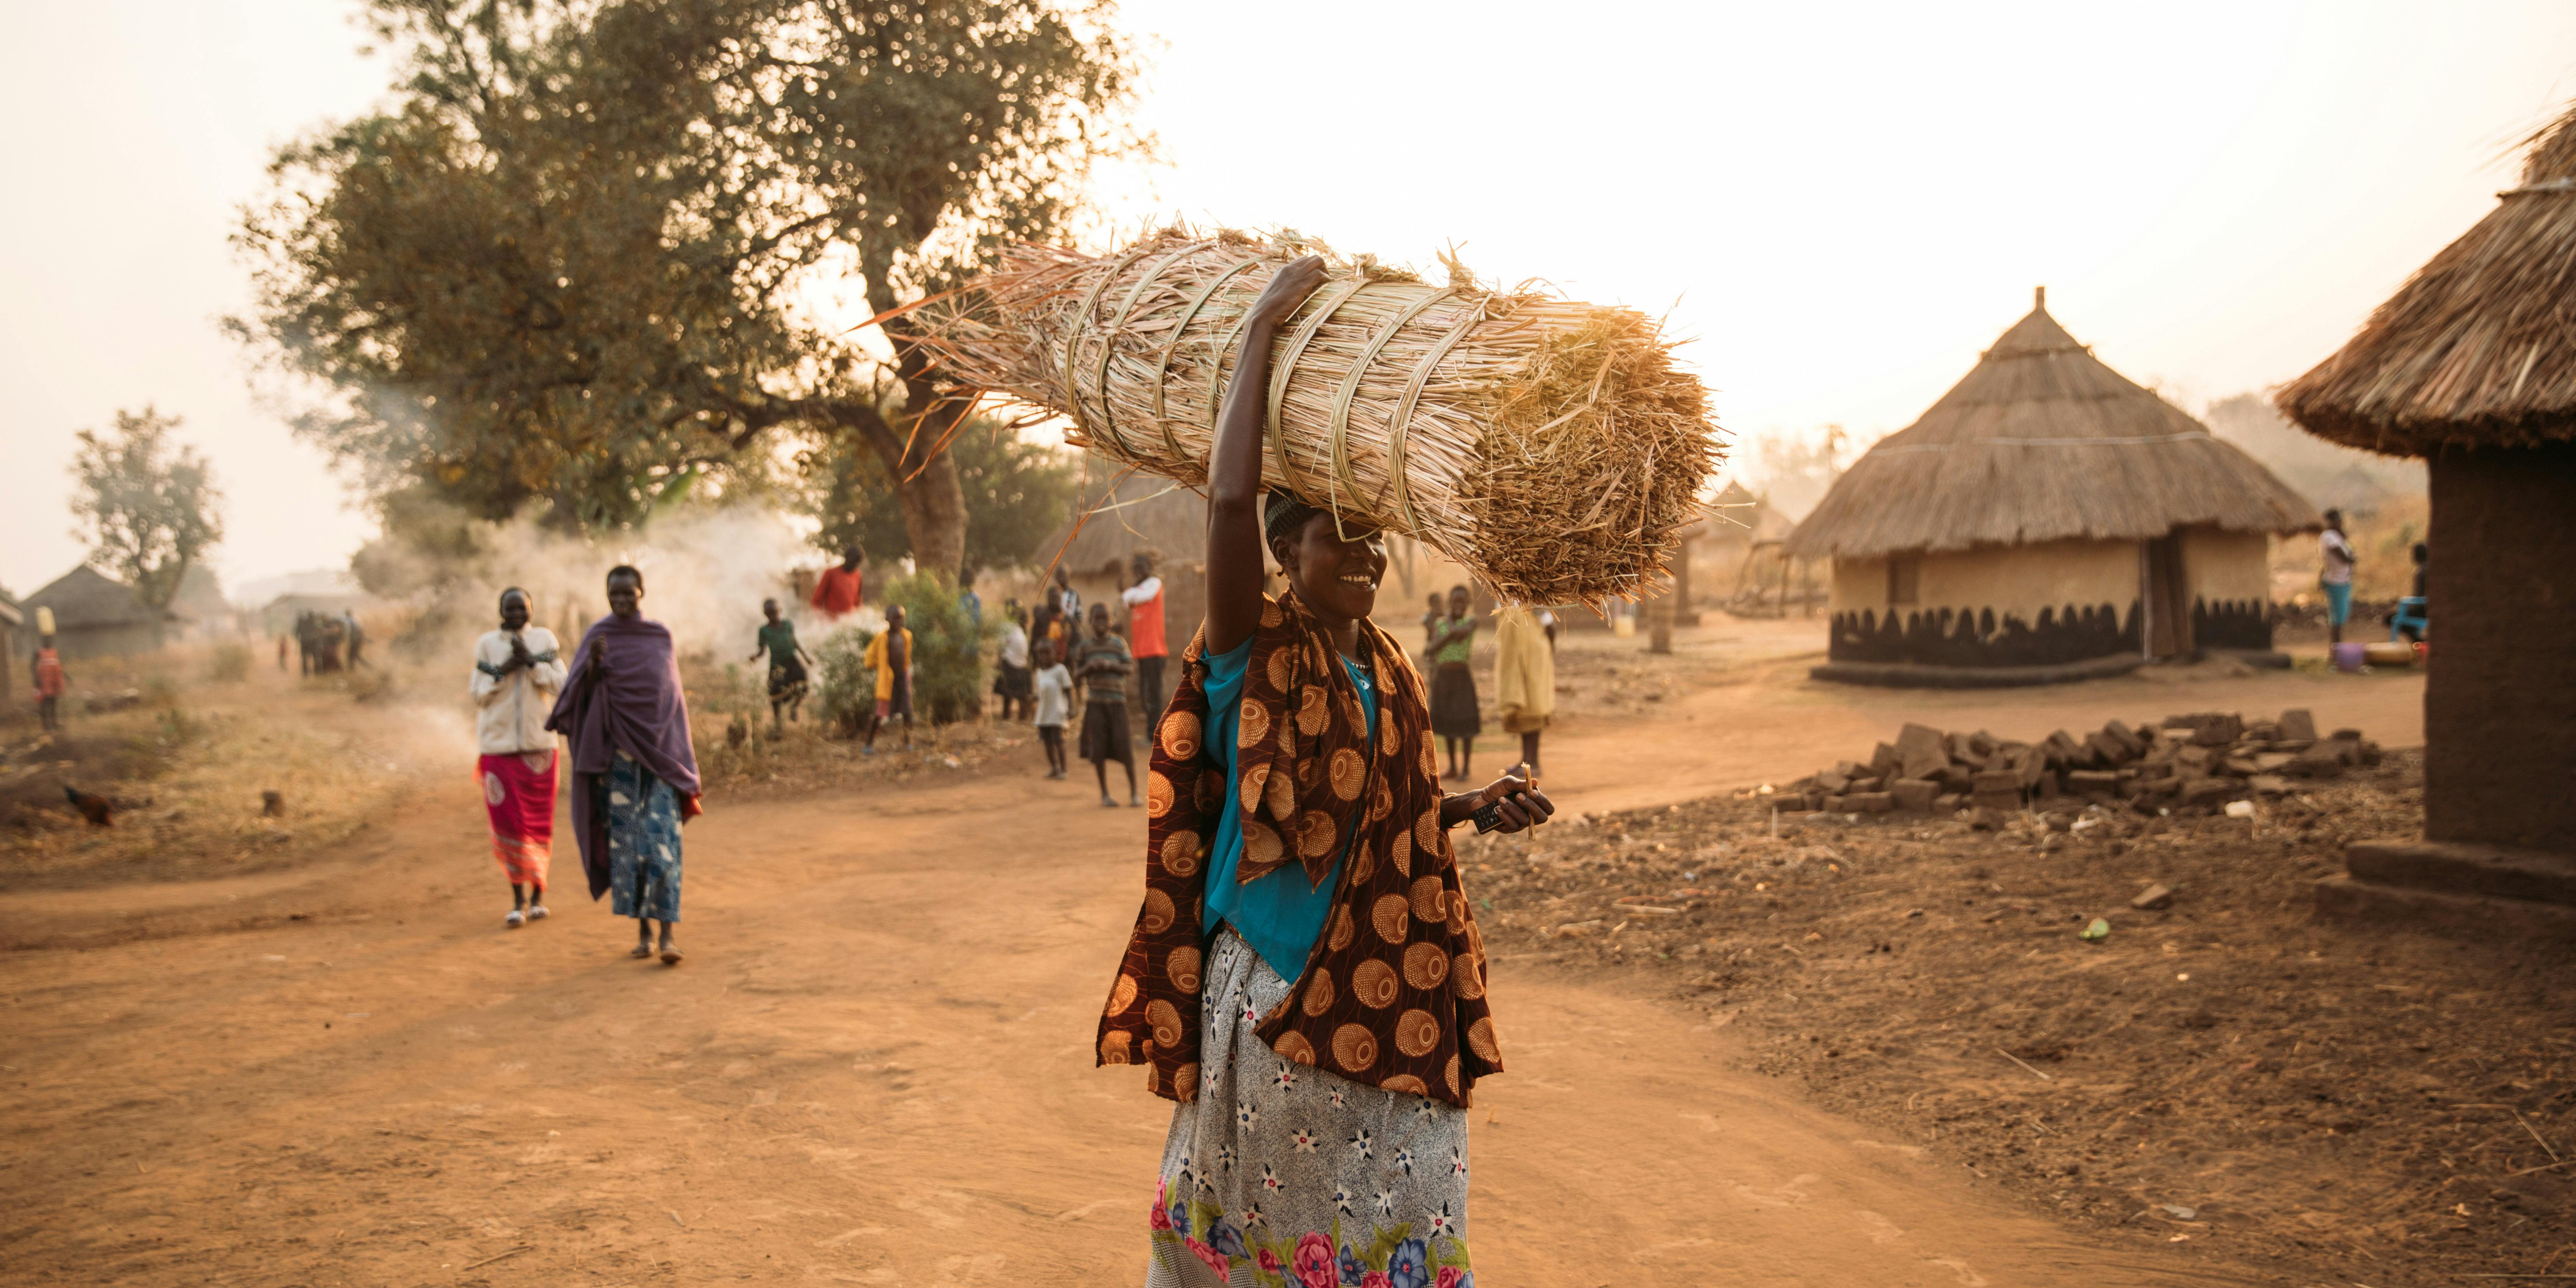 International Womens Day Photoessay - A woman in Uganda and flowy, traditional clothing carries a bundle of hay over her head as she walks across the dirt road in the village